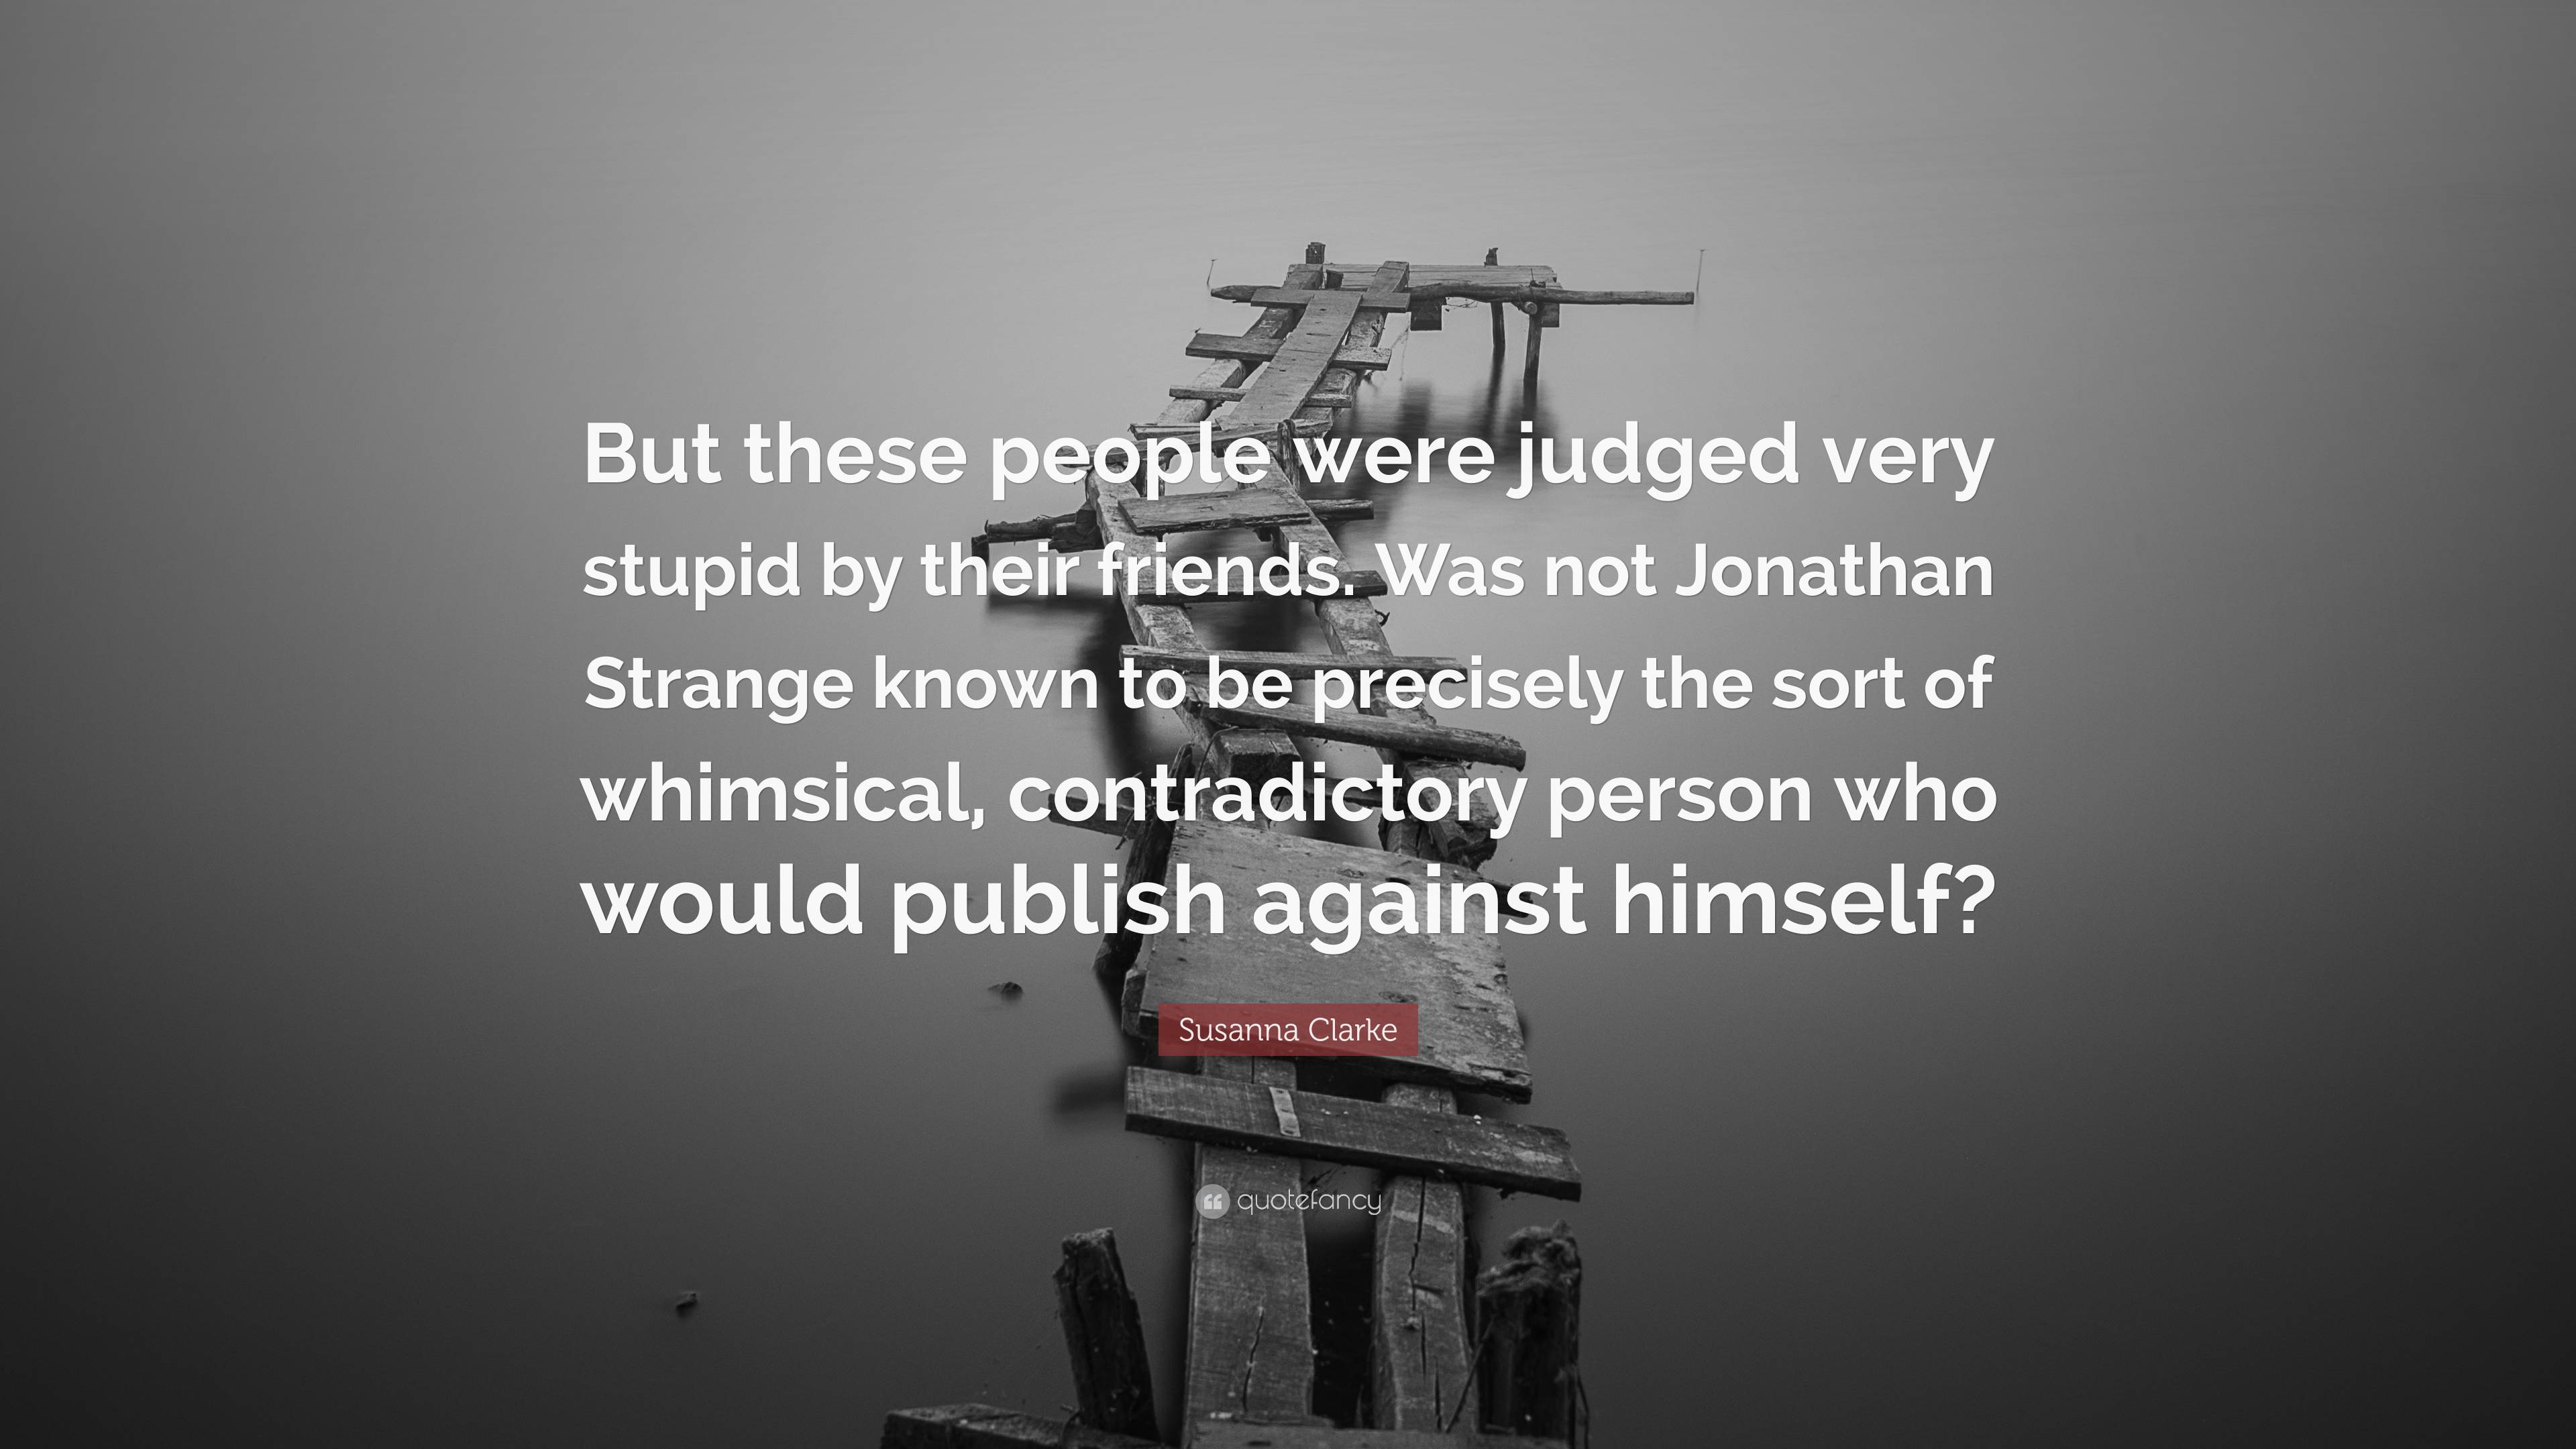 Susanna Clarke Quote: “But these people were judged very stupid by ...